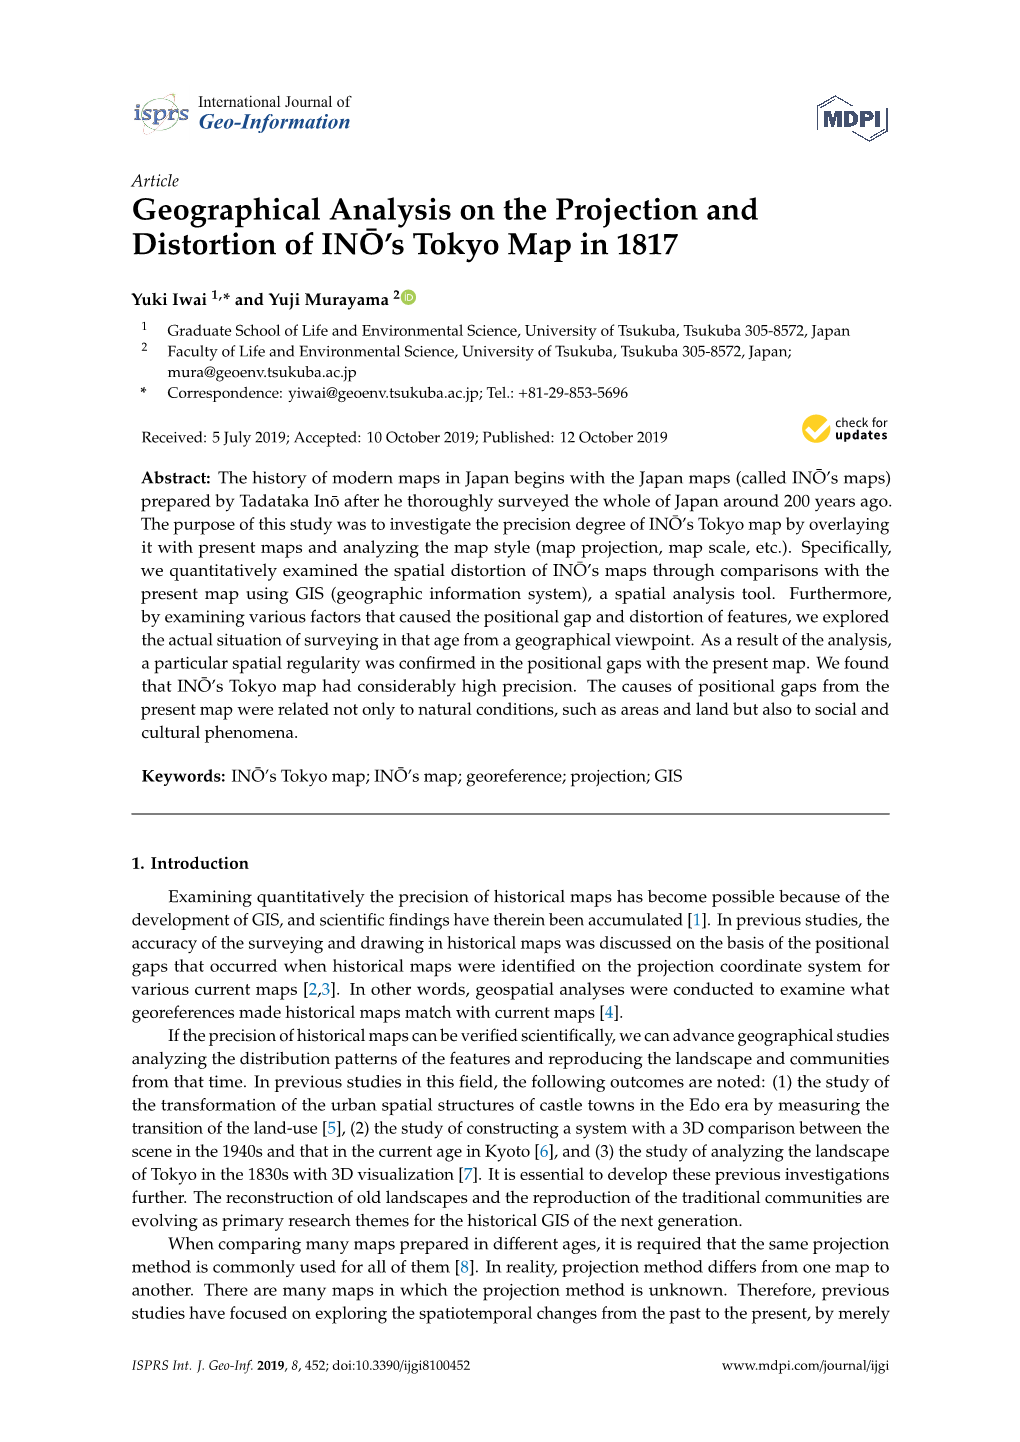 Geographical Analysis on the Projection and Distortion of IN¯O's